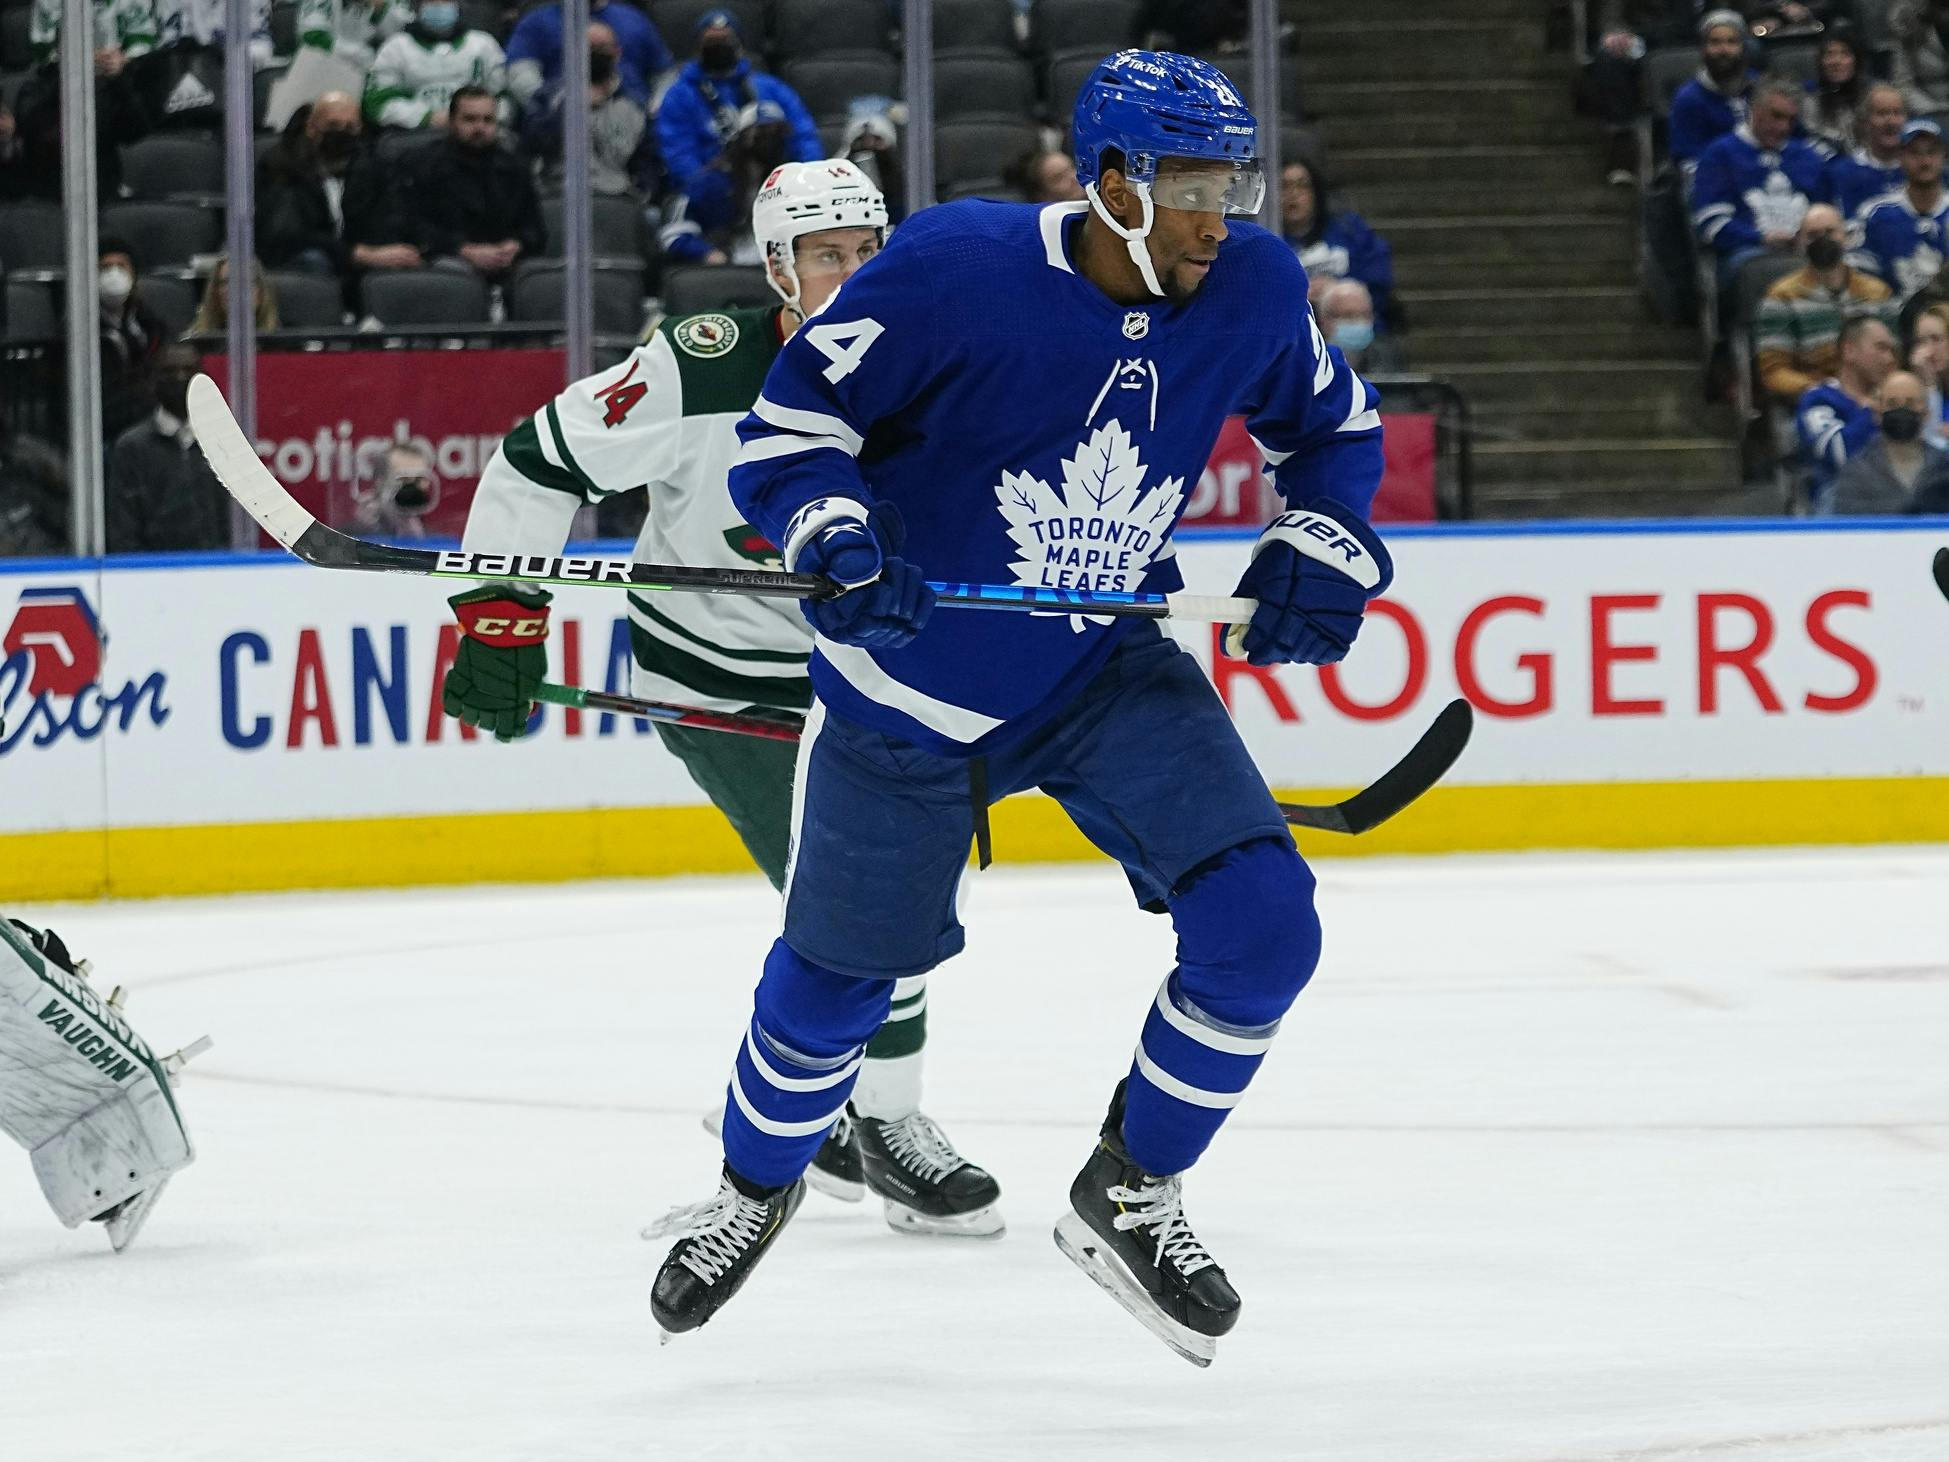 Leafs forced to make a move, dump Wayne Simmonds in AHL - HockeyFeed